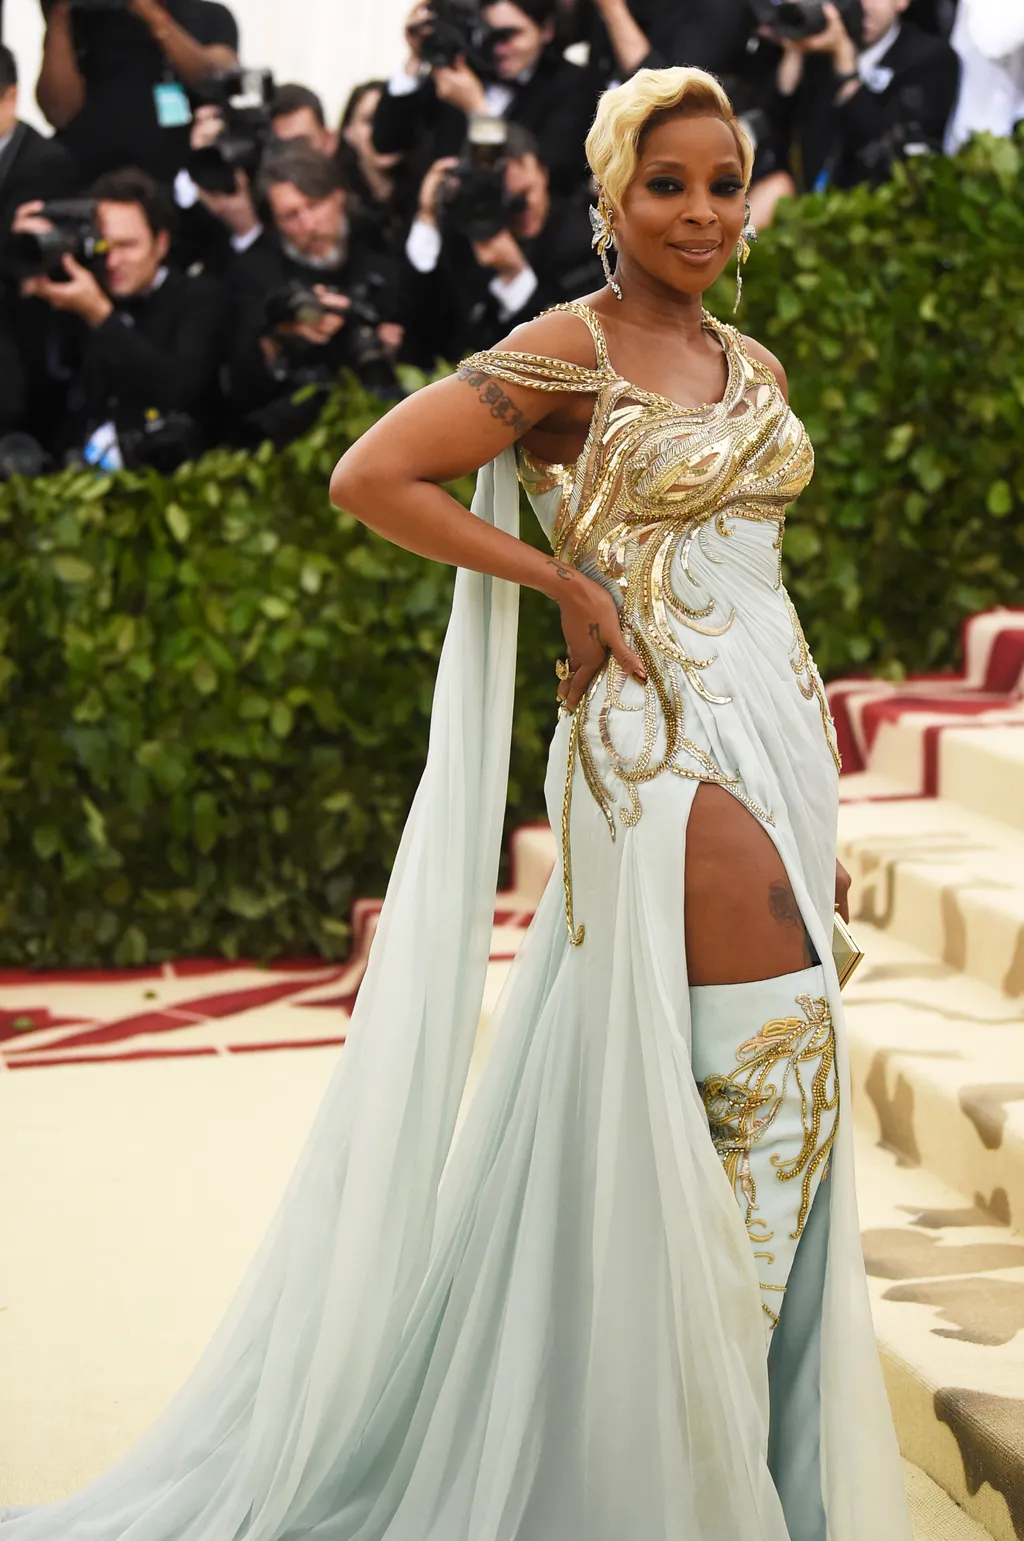 Heavenly Bodies: Fashion & The Catholic Imagination Costume Institute Gala - Arrivals GettyImageRank2 Met Gala Met Ball Arts Culture and Entertainment FASHION Celebrities 